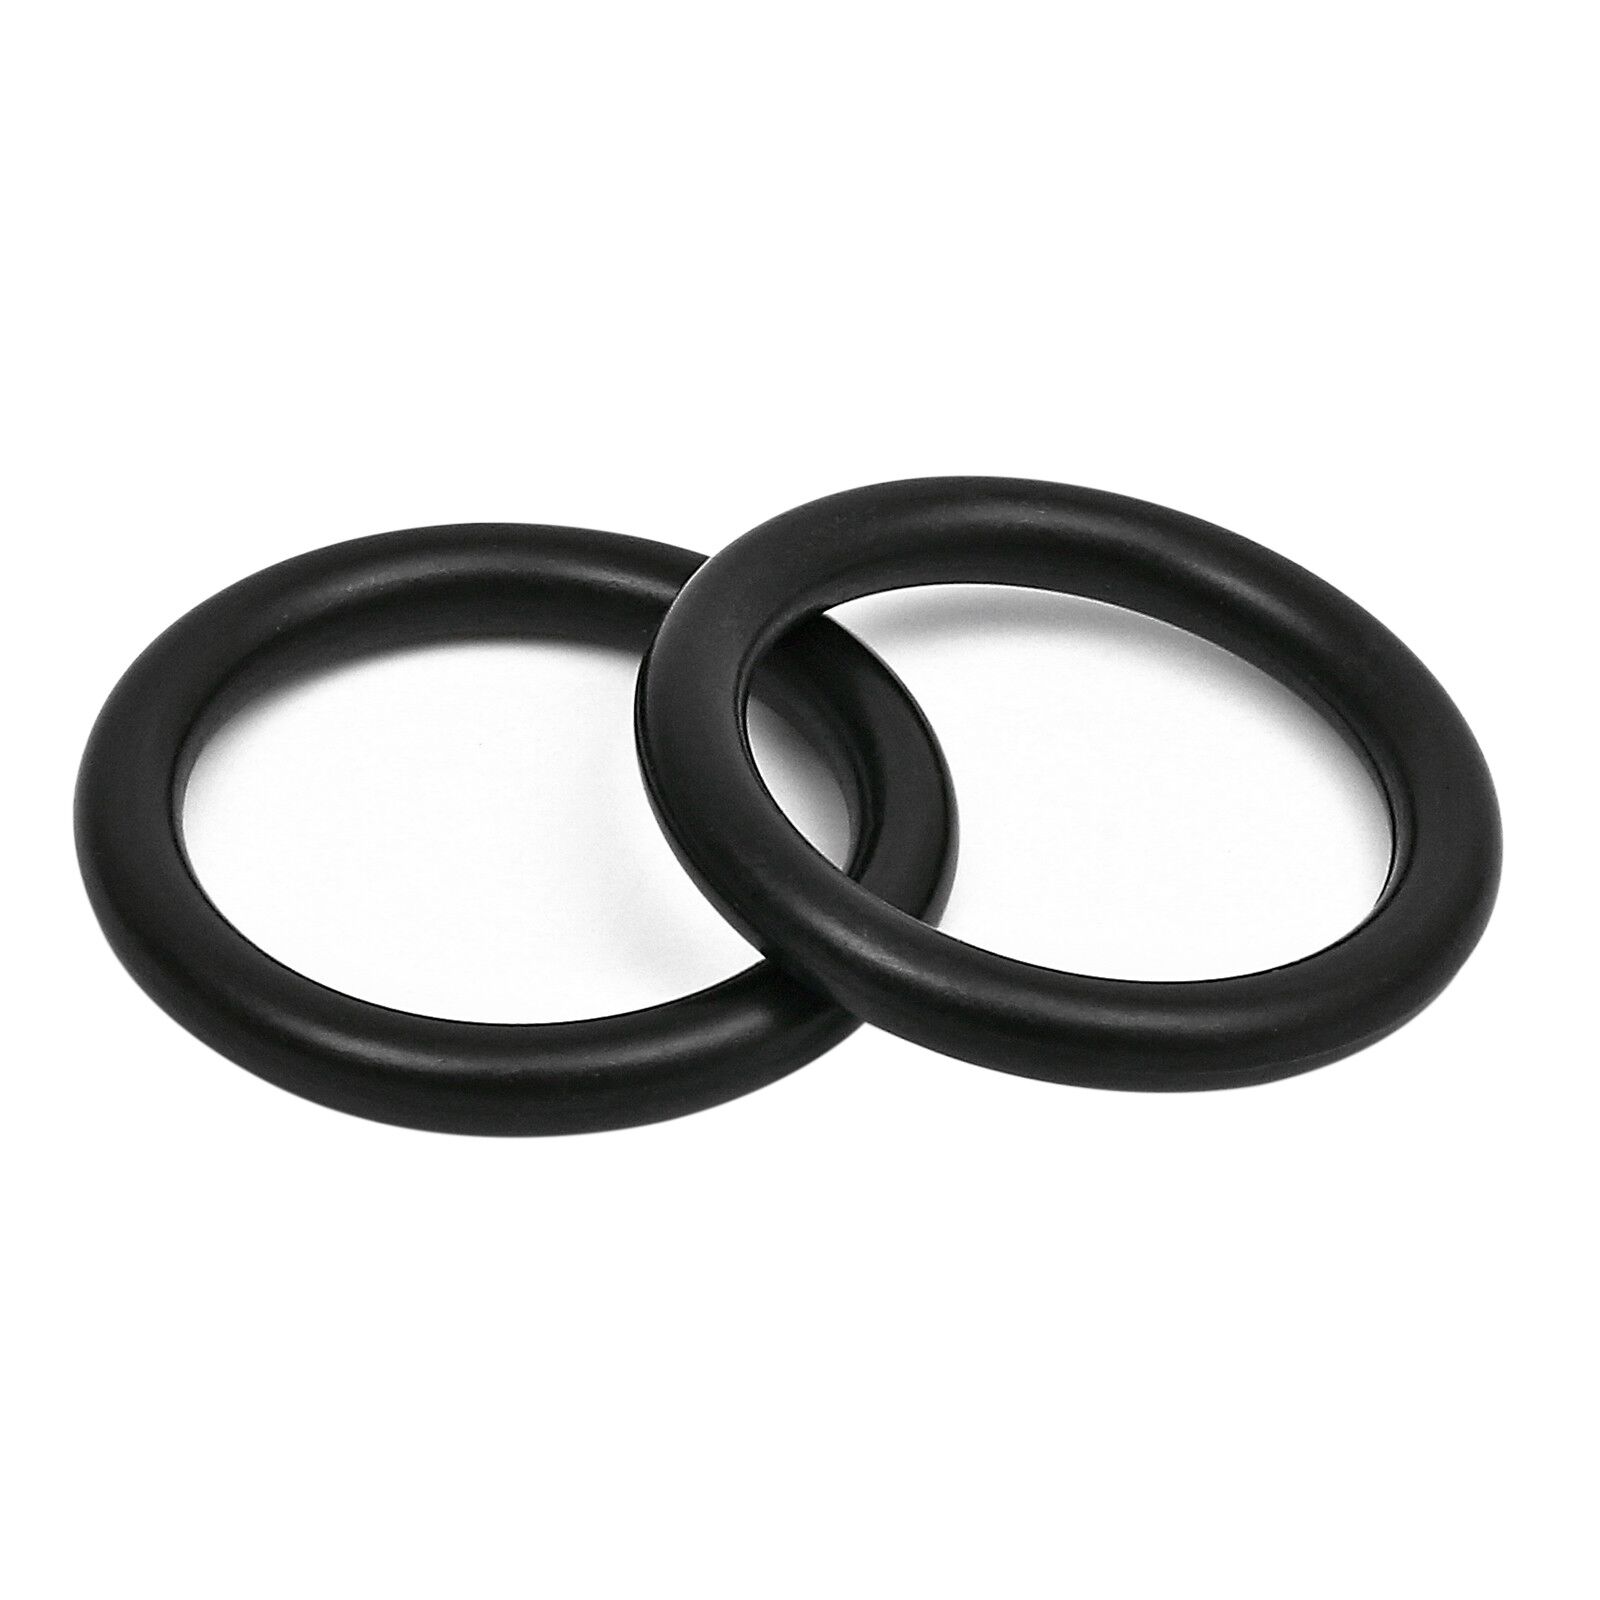 EHEIM - O-Rings for Adapter and Partition Wall - 2 pcs